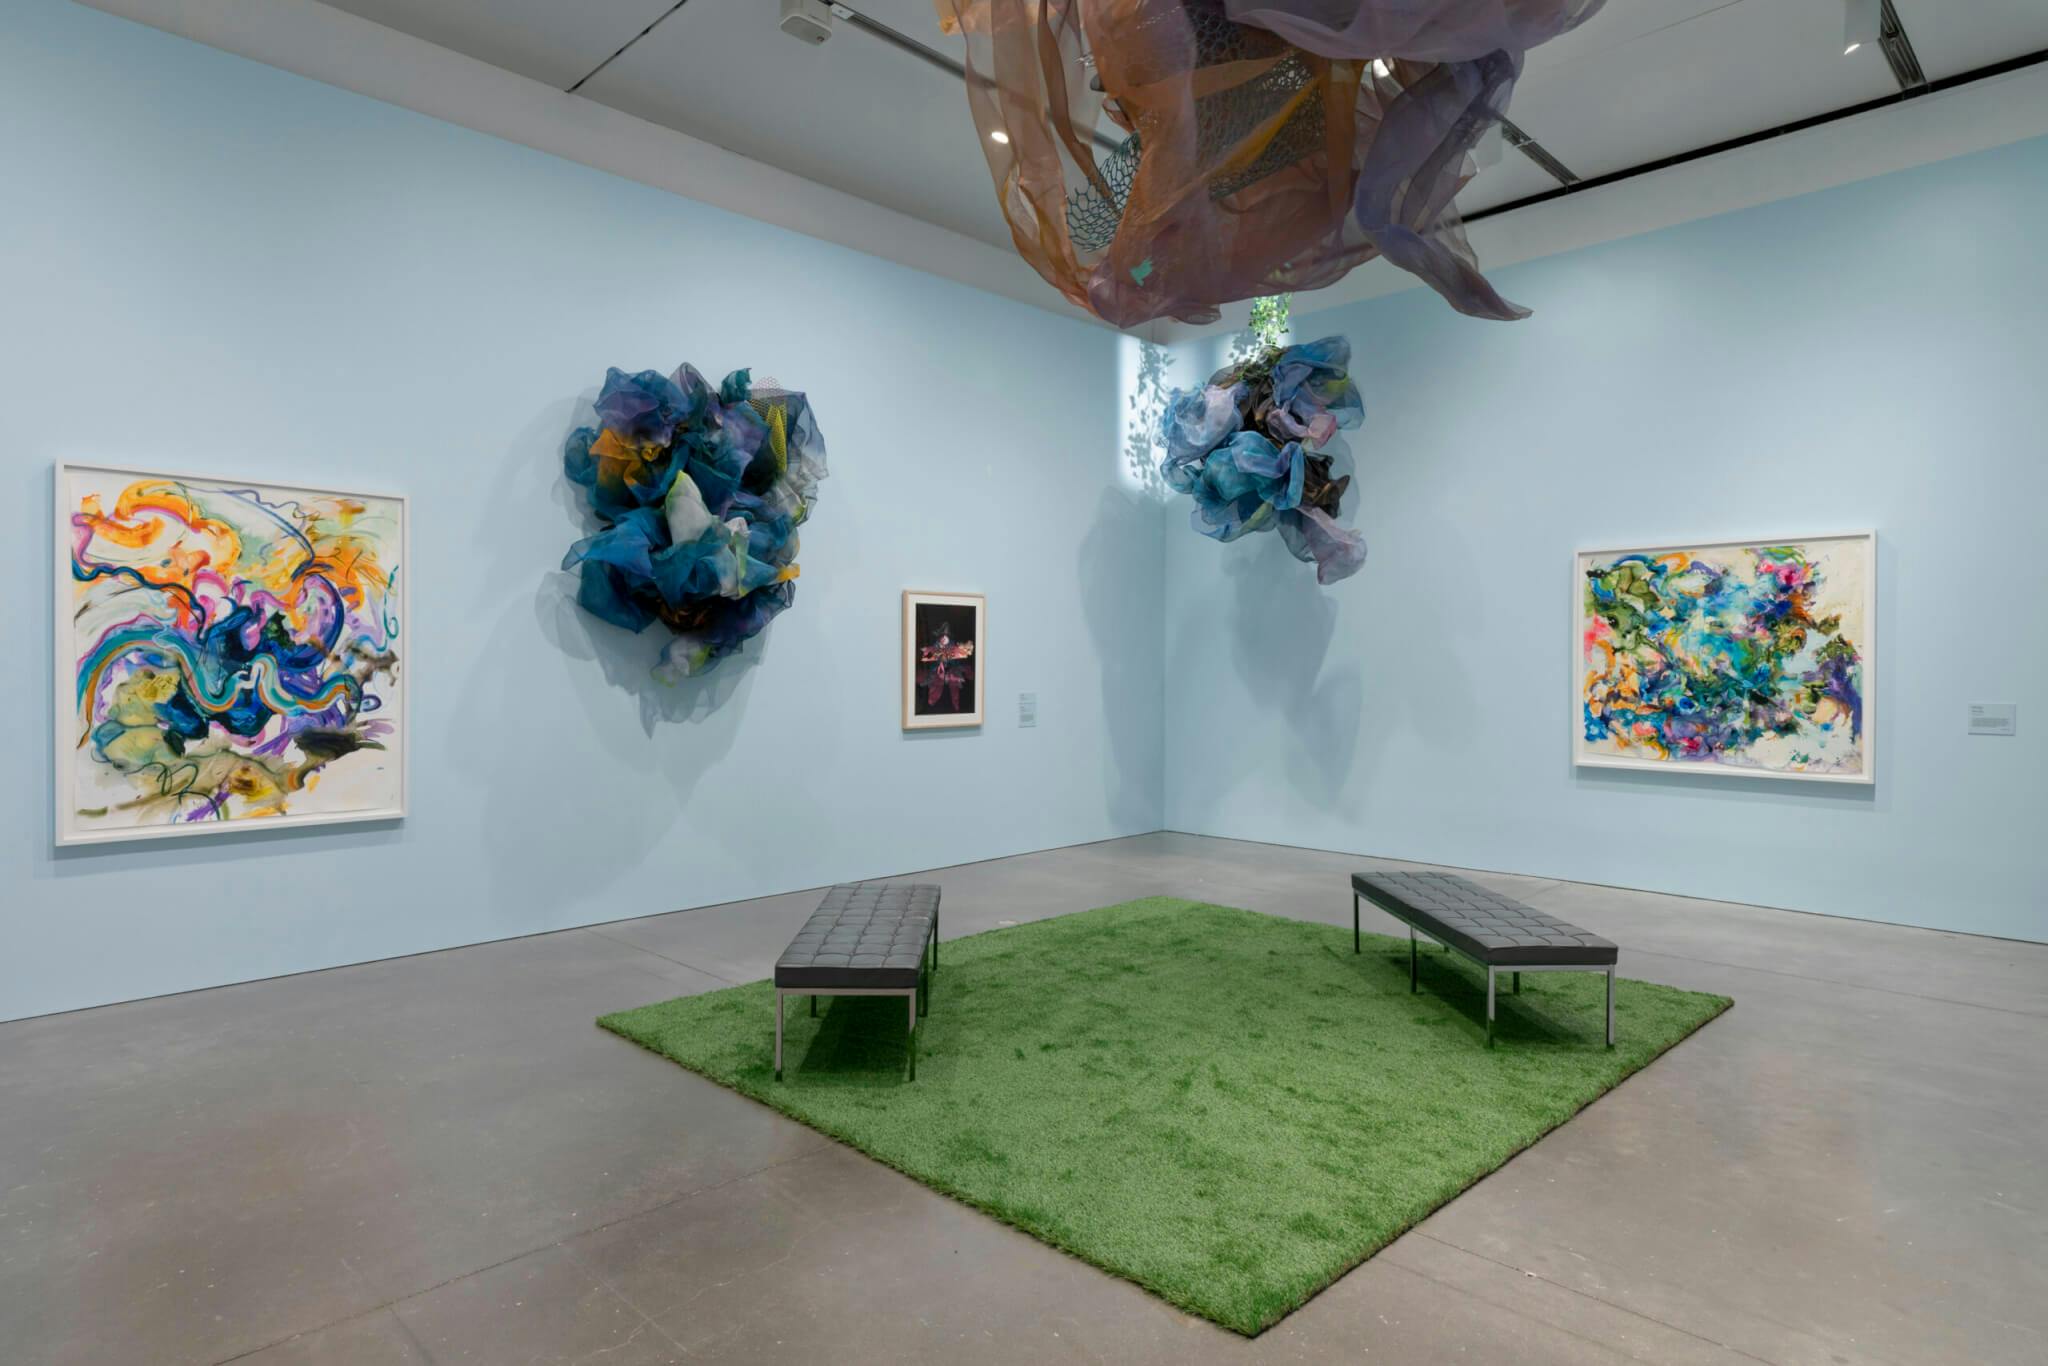 Installation view of “Cicely Carew" at the Institute of Contemporary Art/Boston